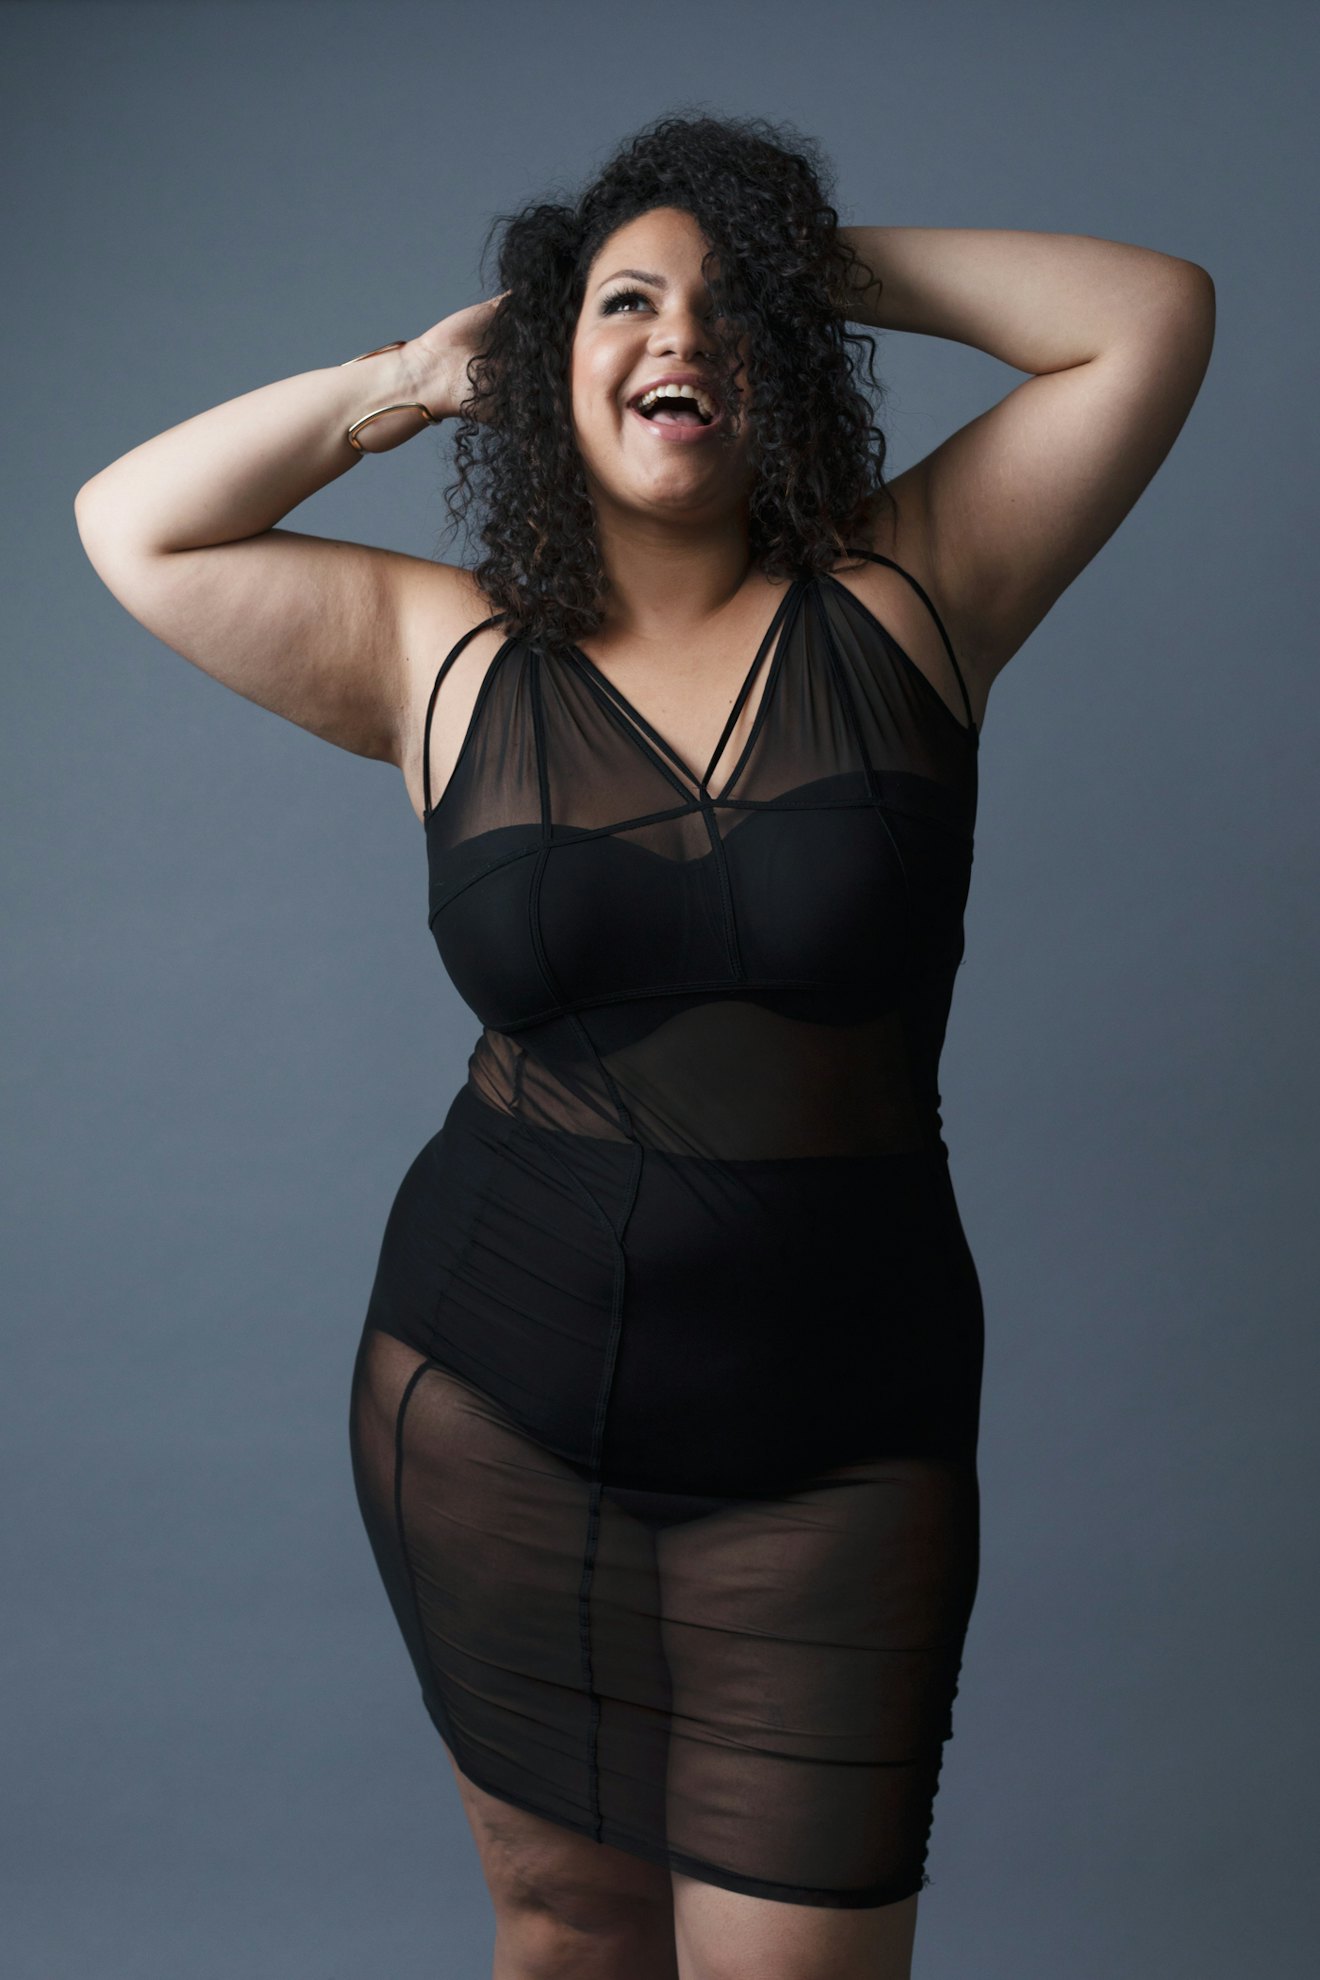 Things women wear to feel sexy and confident - Jamaica Observer